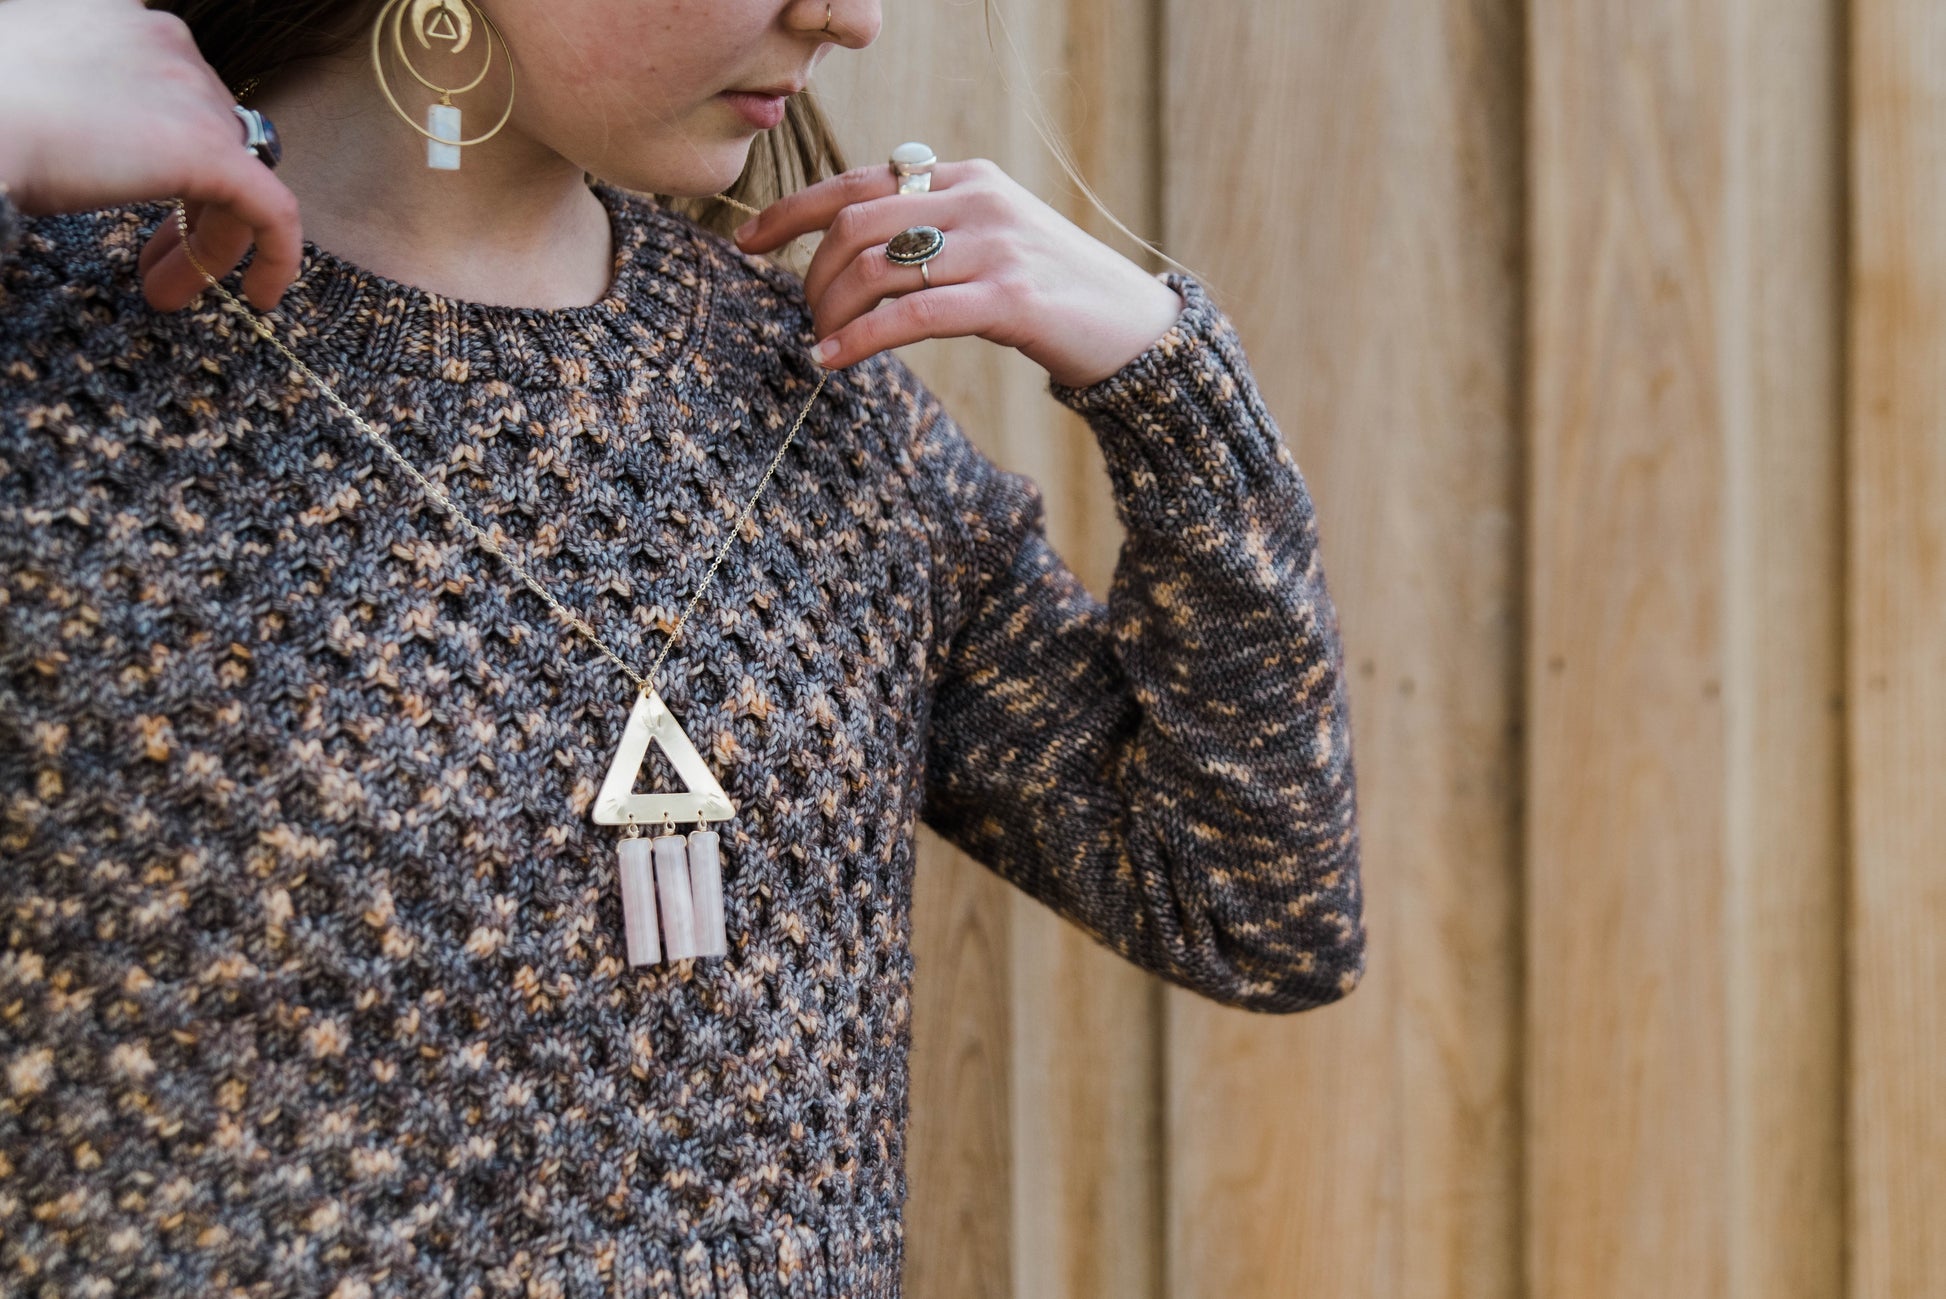 Haley puts on a large triangle pendant necklace. She wears a sweater, knit with variegated brown yarn that's designed with a honeycomb stitch pattern on the body.